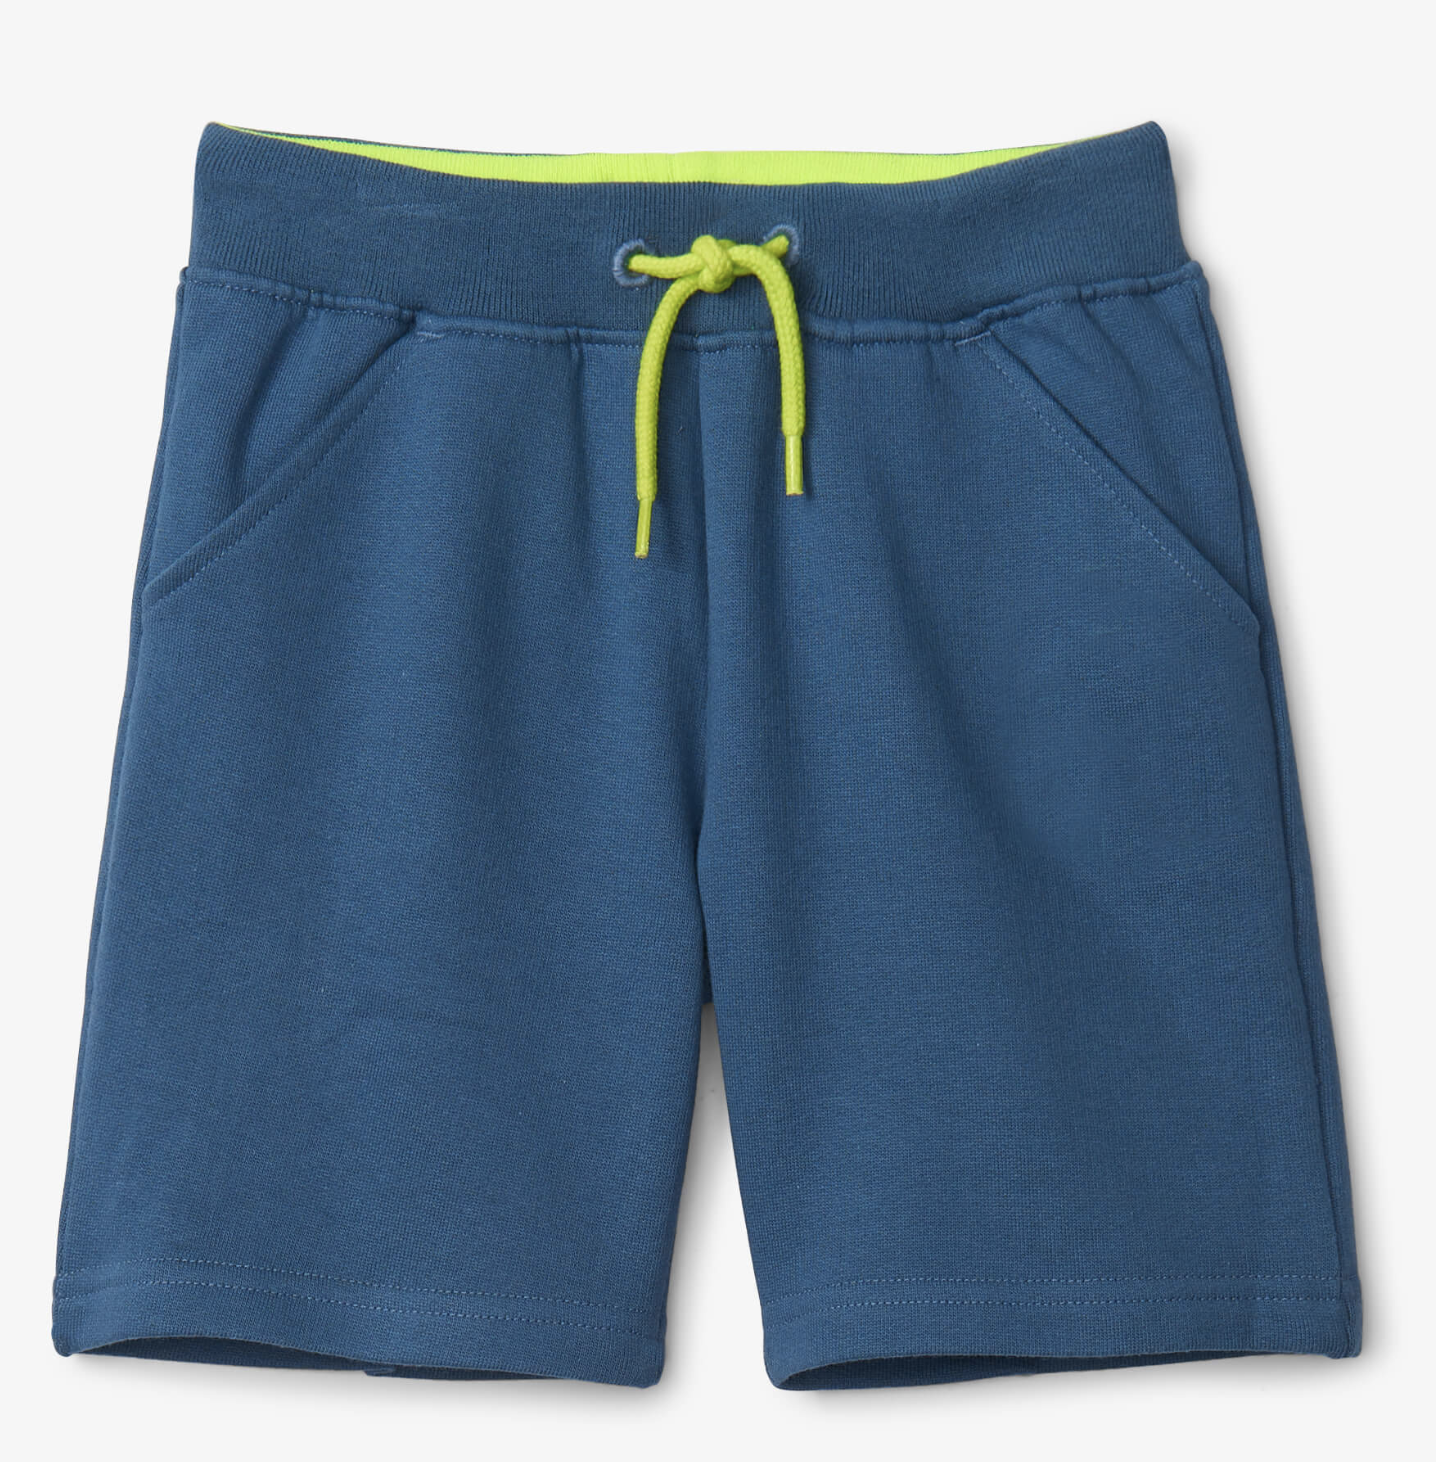 ensign blue terry shorts